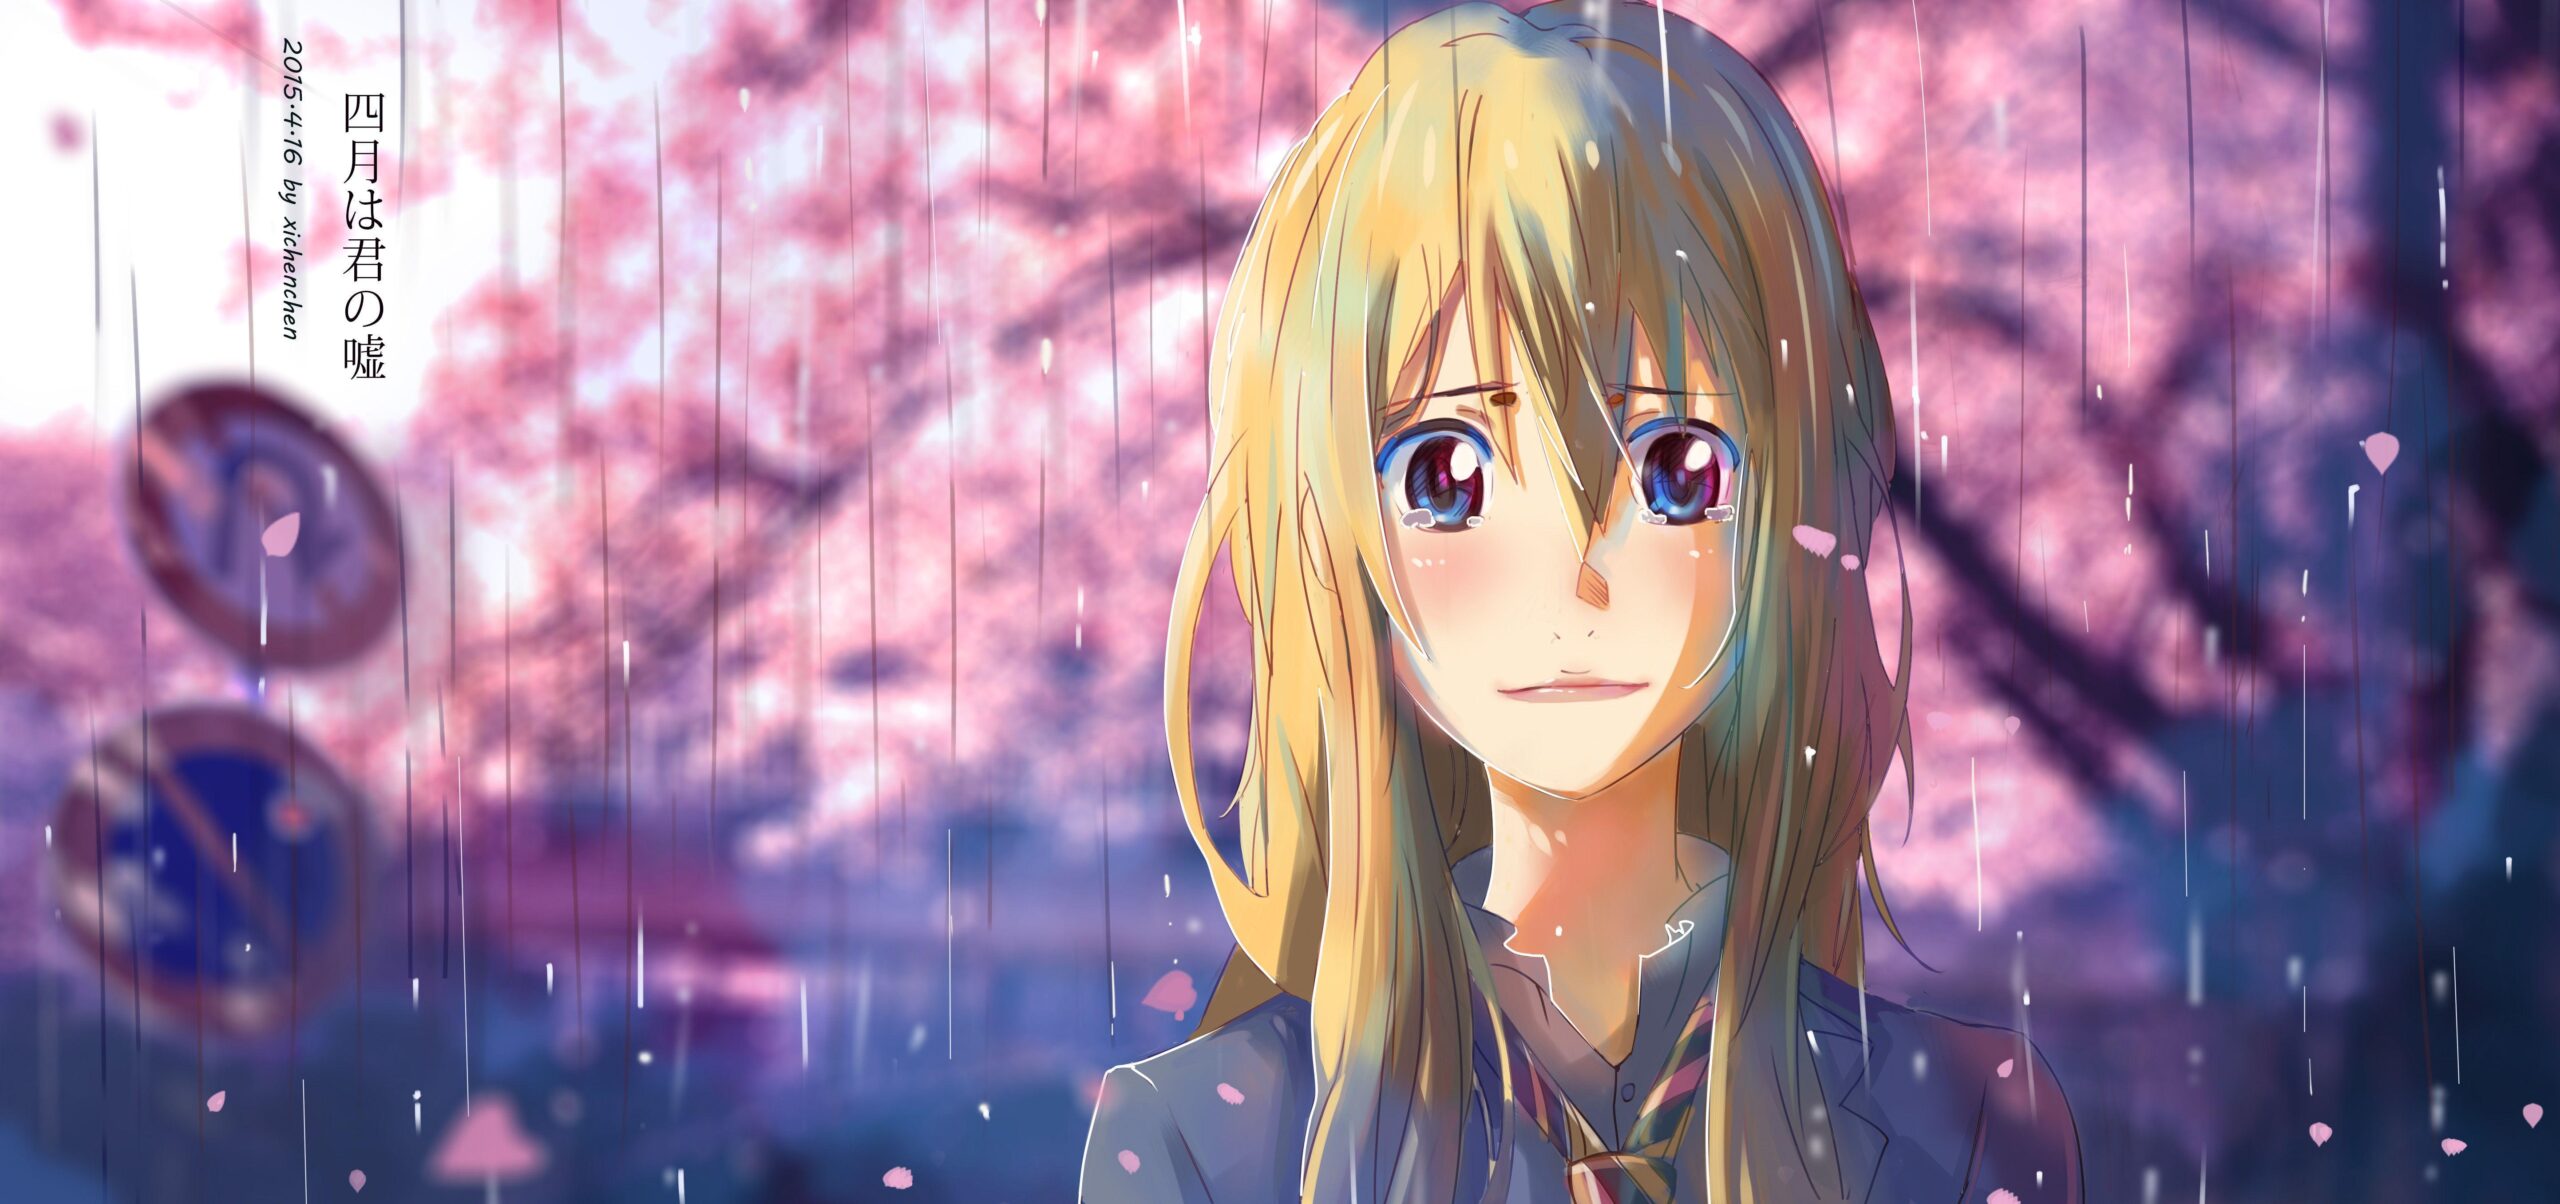 Your Lie In April Wallpaper For Ipad, Your Lie In April, Anime